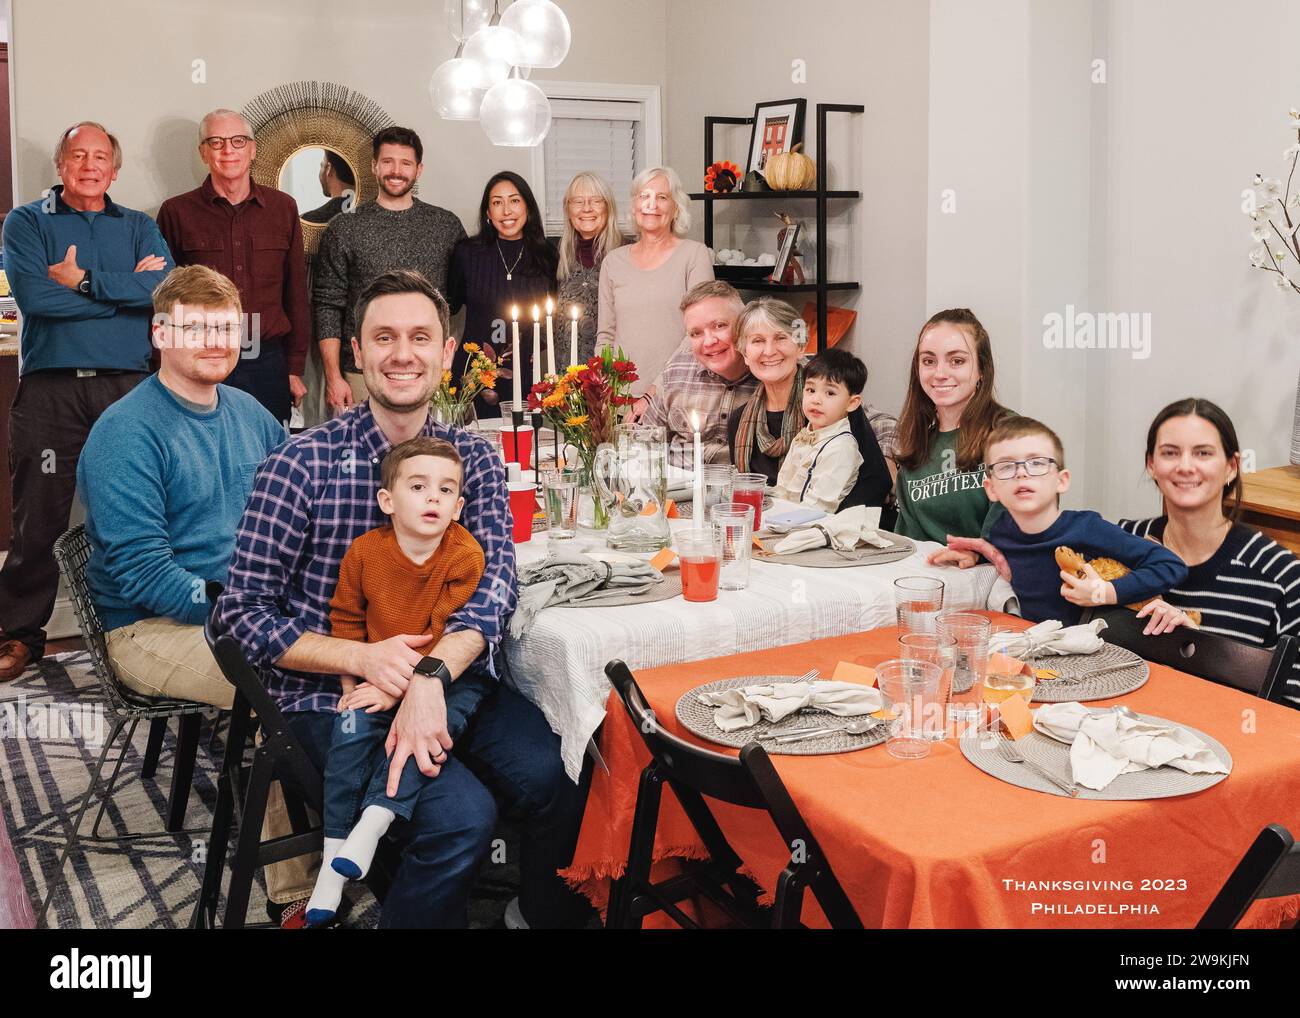 Interior group portrait of extended family gathered for Thanksgiving Day meal Stock Photo